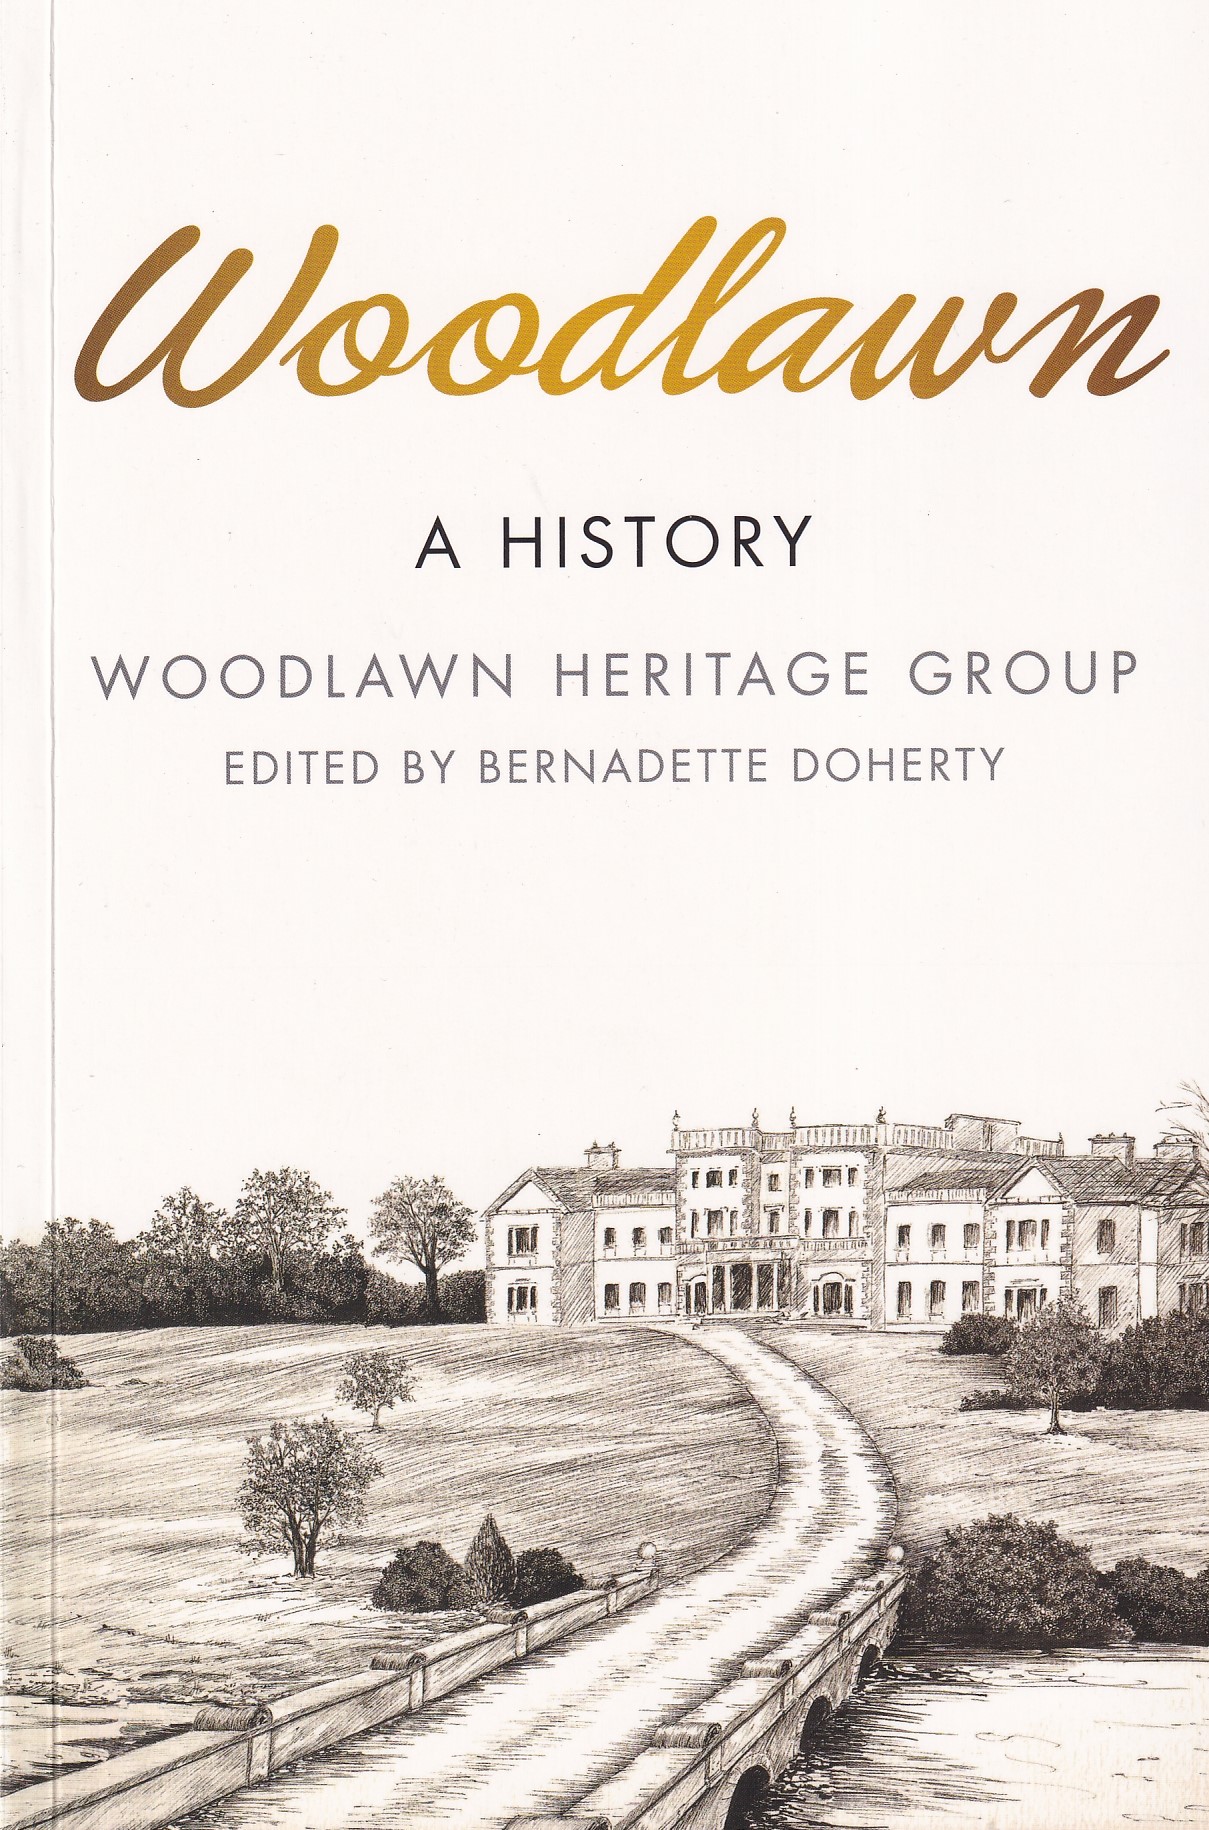 Woodlawn: A History | Woodlawn Heritage Group | Charlie Byrne's